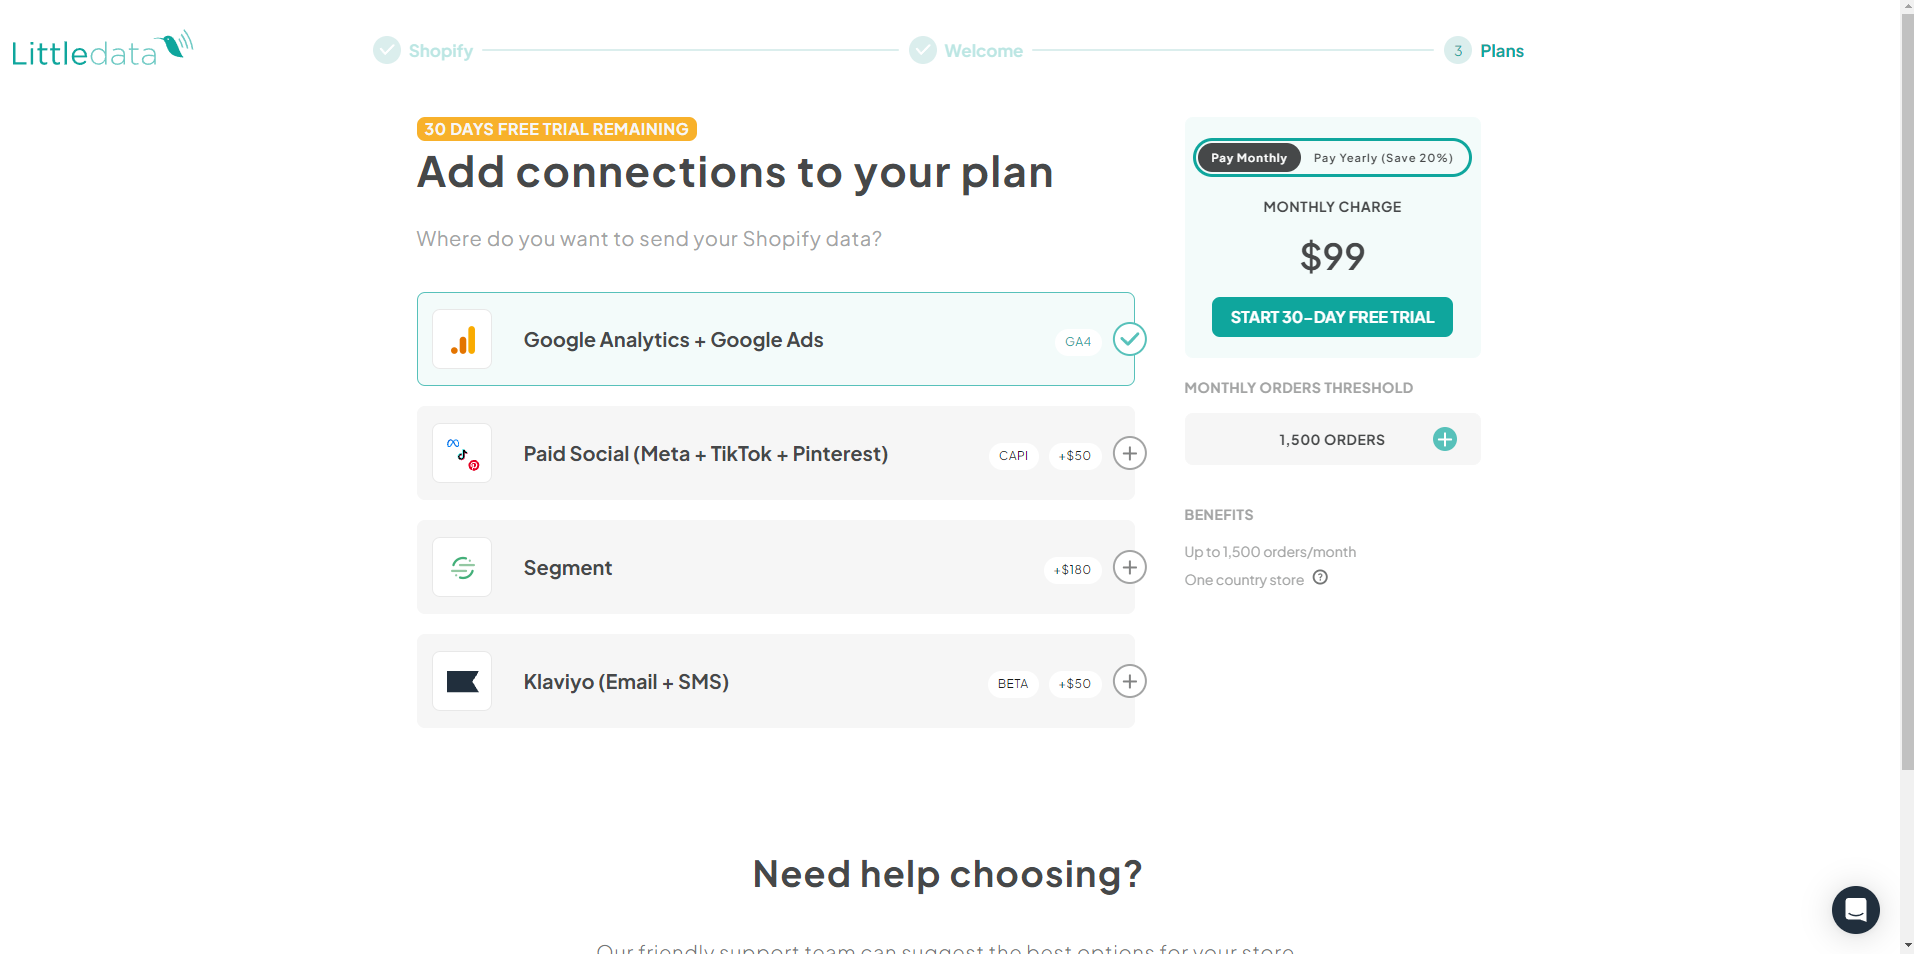 Choose your plan and connections